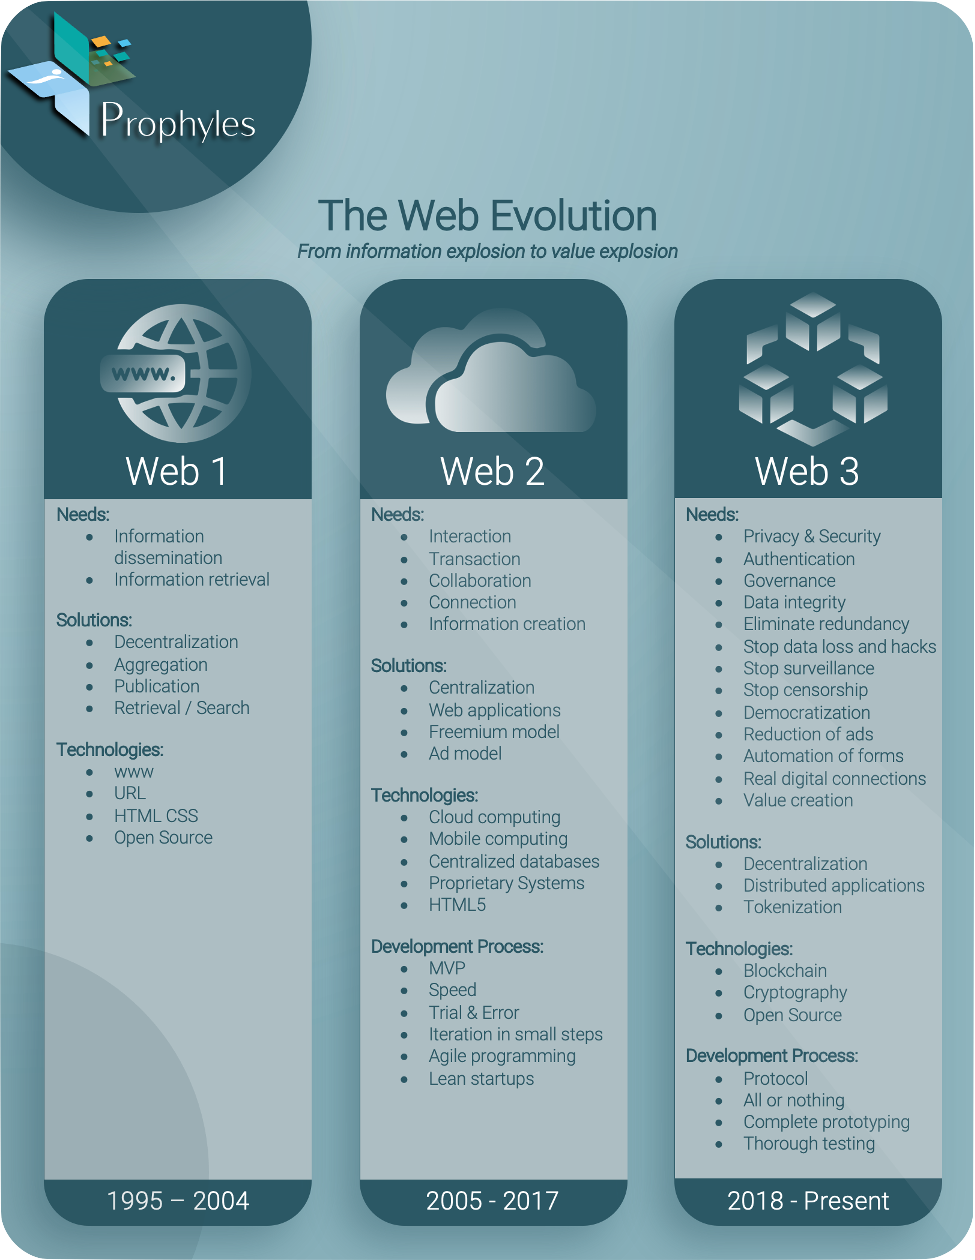 The Web Evolution from Web1 to Web3